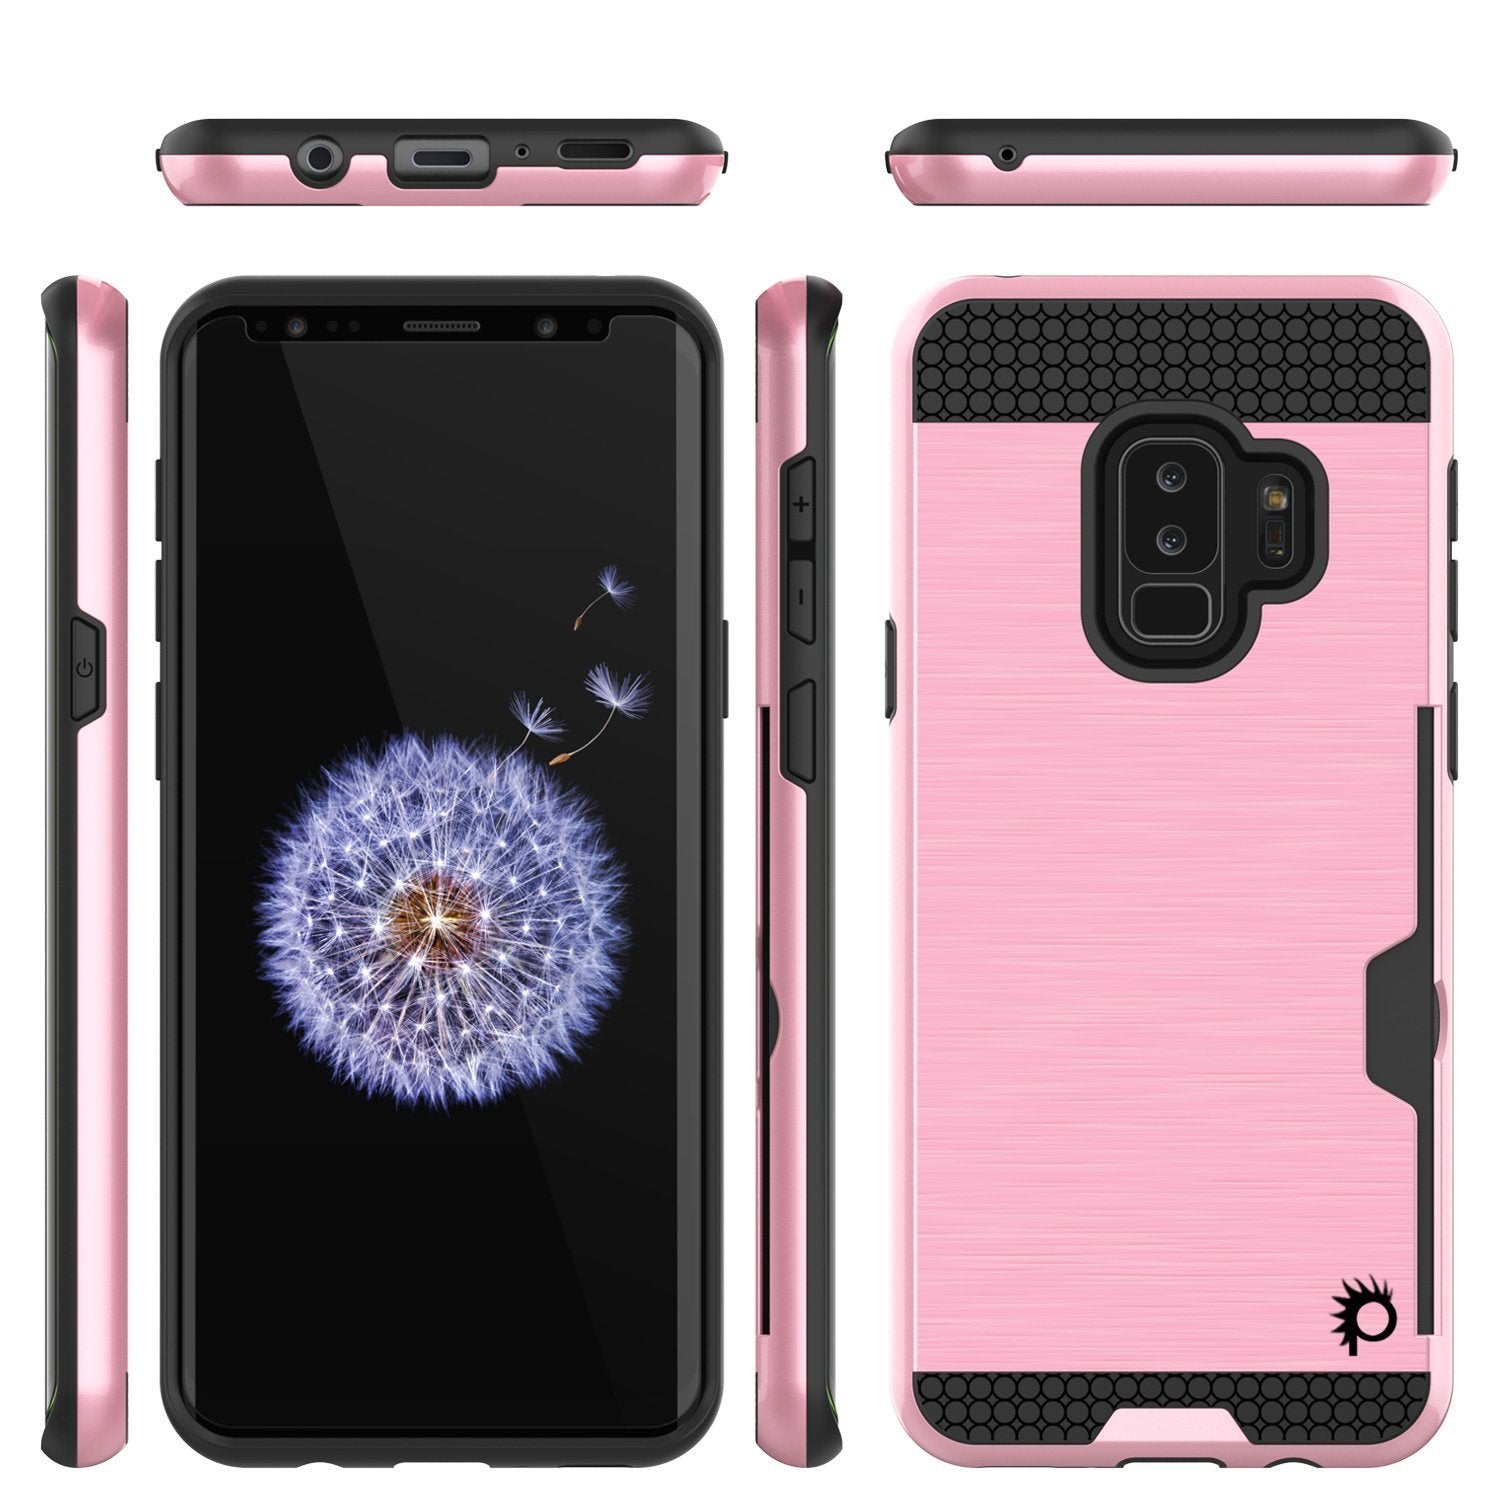 Galaxy S9 Plus Case, PUNKcase [SLOT Series] [Slim Fit] Dual-Layer Armor Cover w/Integrated Anti-Shock System [Pink] - PunkCase NZ